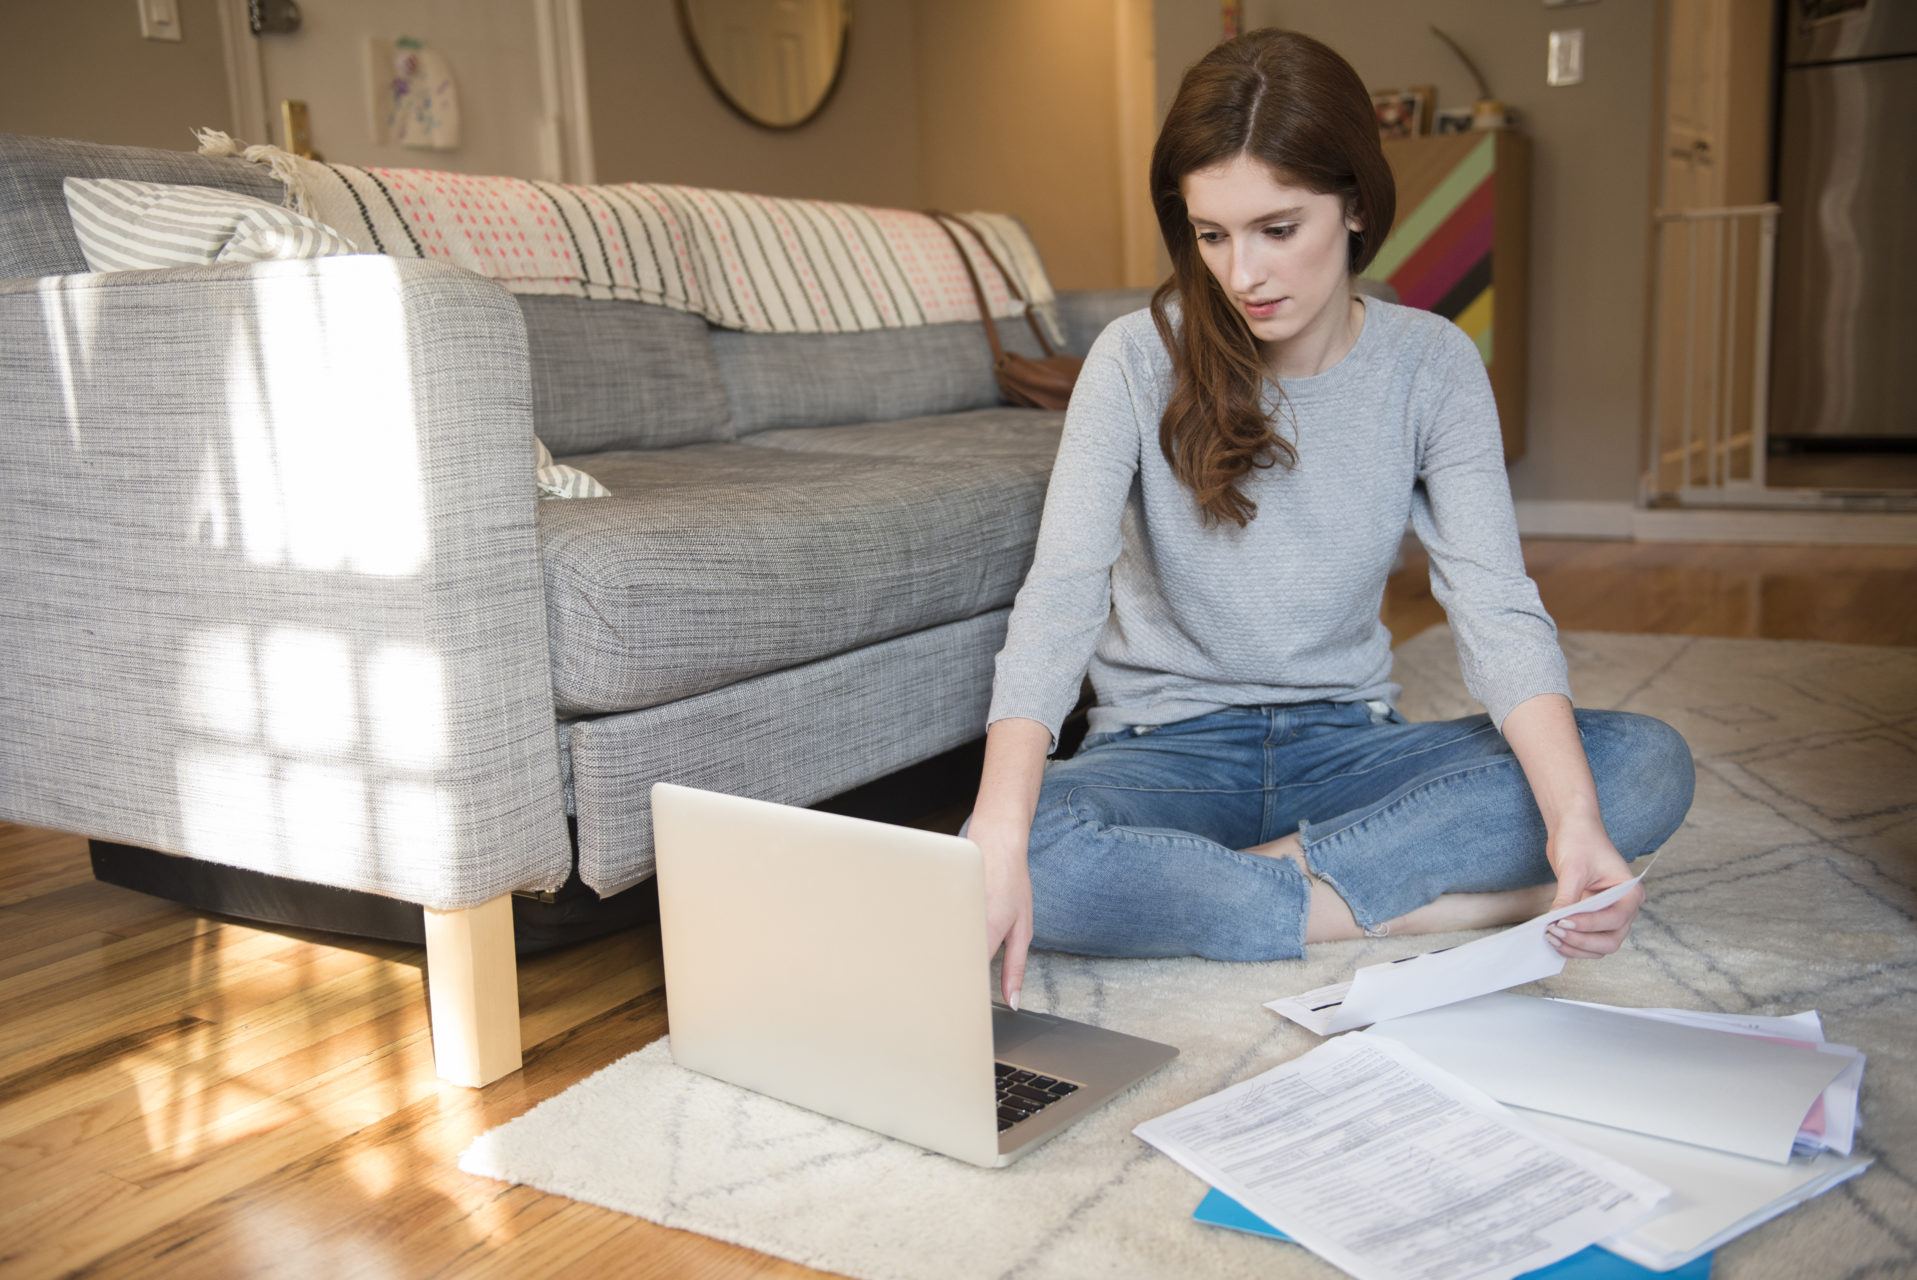 woman sitting on floor paying bills with laptop